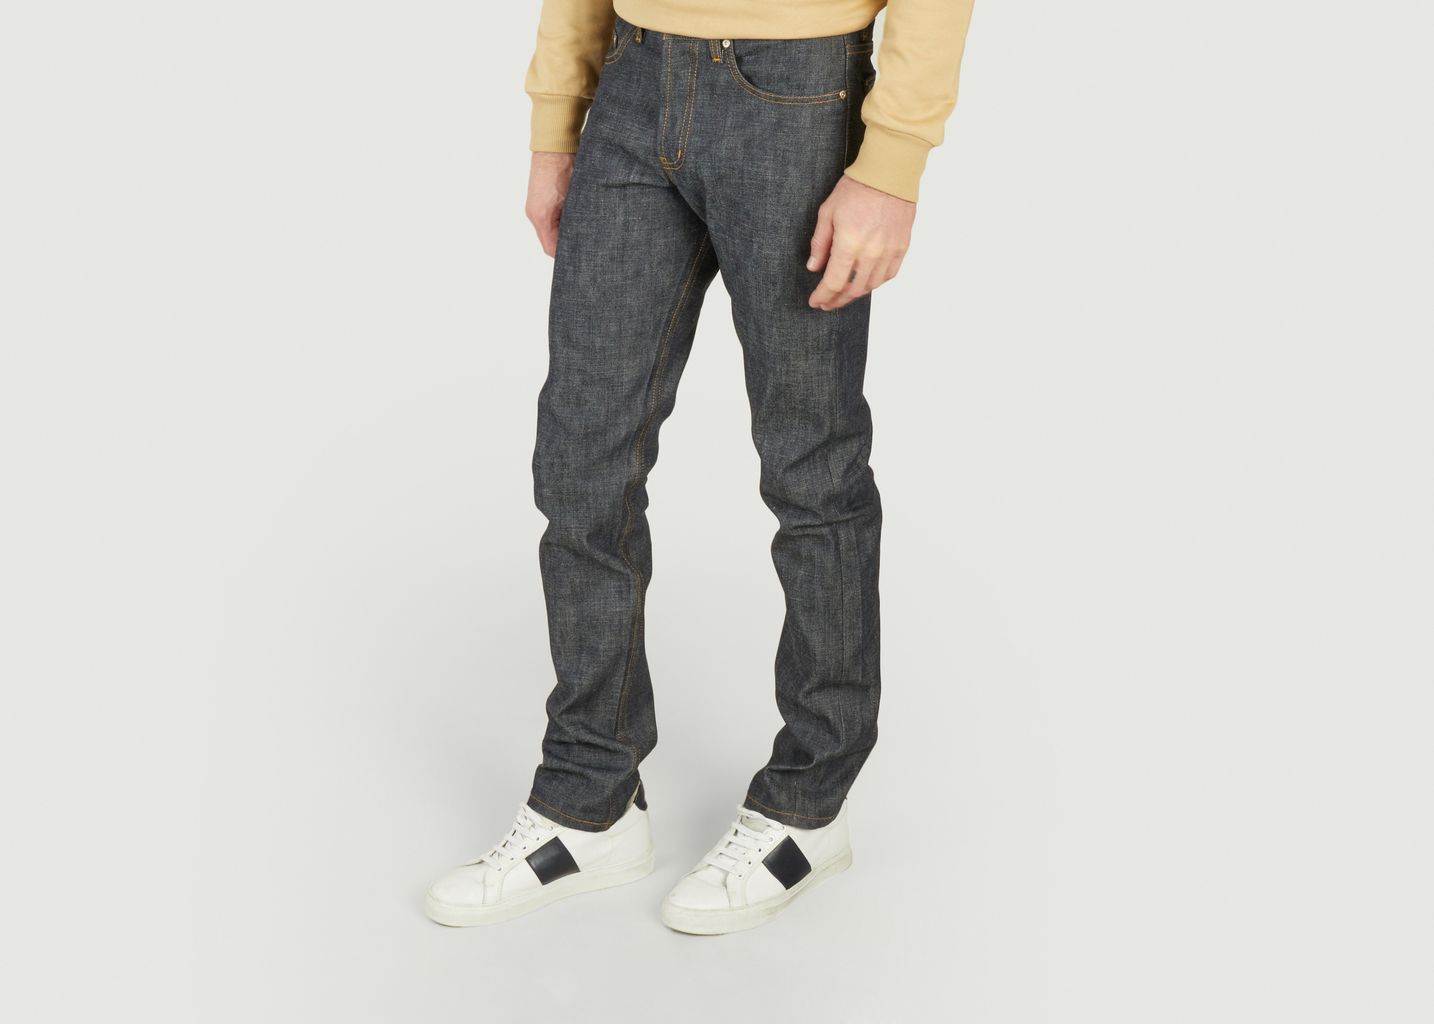 Tried & True Selvedge True Guy Jeans - Naked and Famous